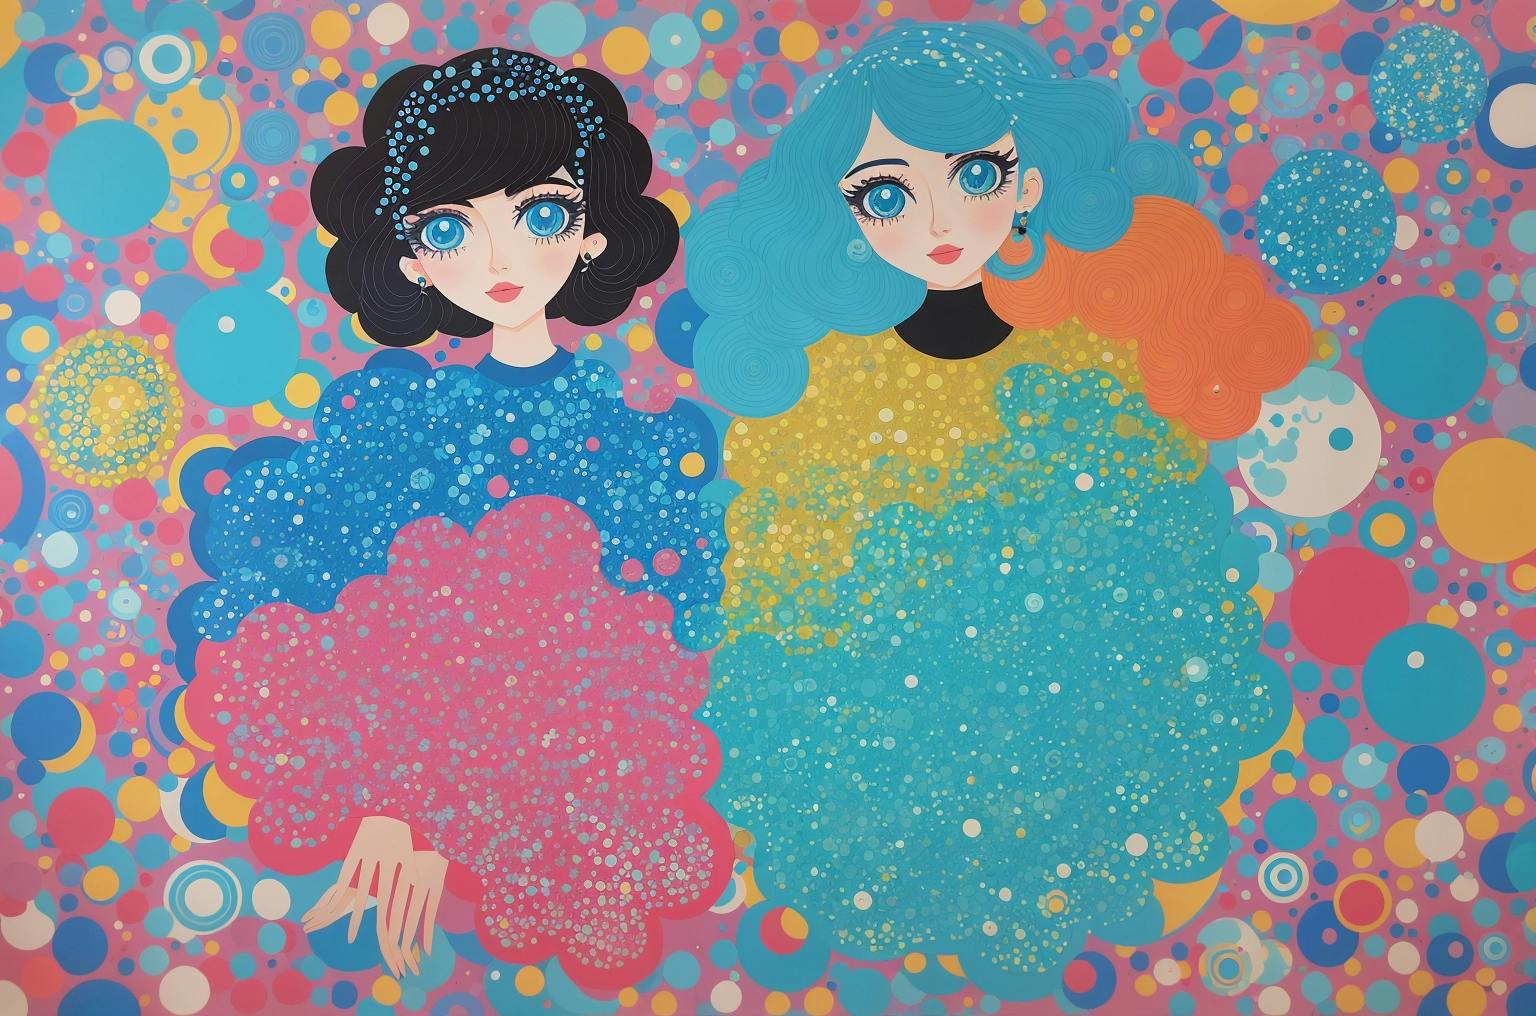 image of a pair of women drawn in a 2d style with lots of bright colors and puffy, cloud-like dresses.